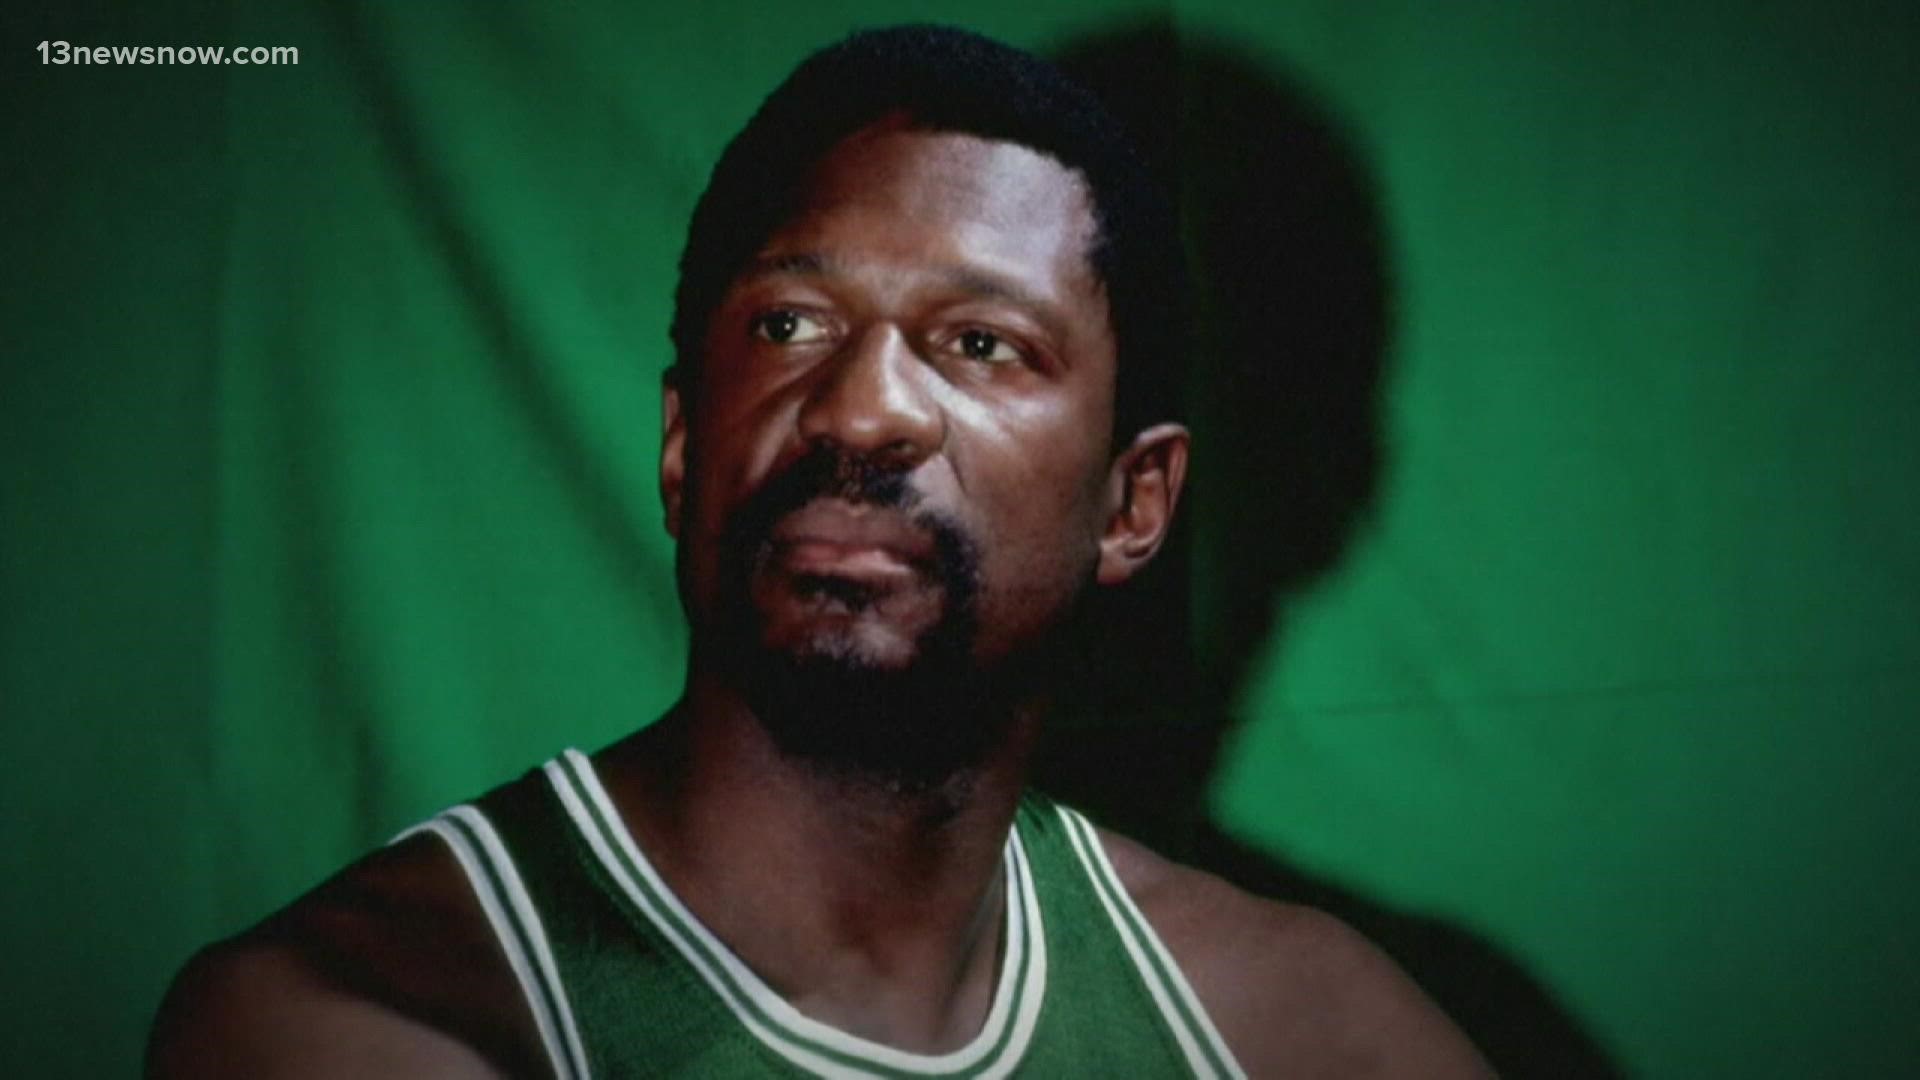 NBA FILE: Bill Russell (6) of the Boston Celtics looks on as Tommy